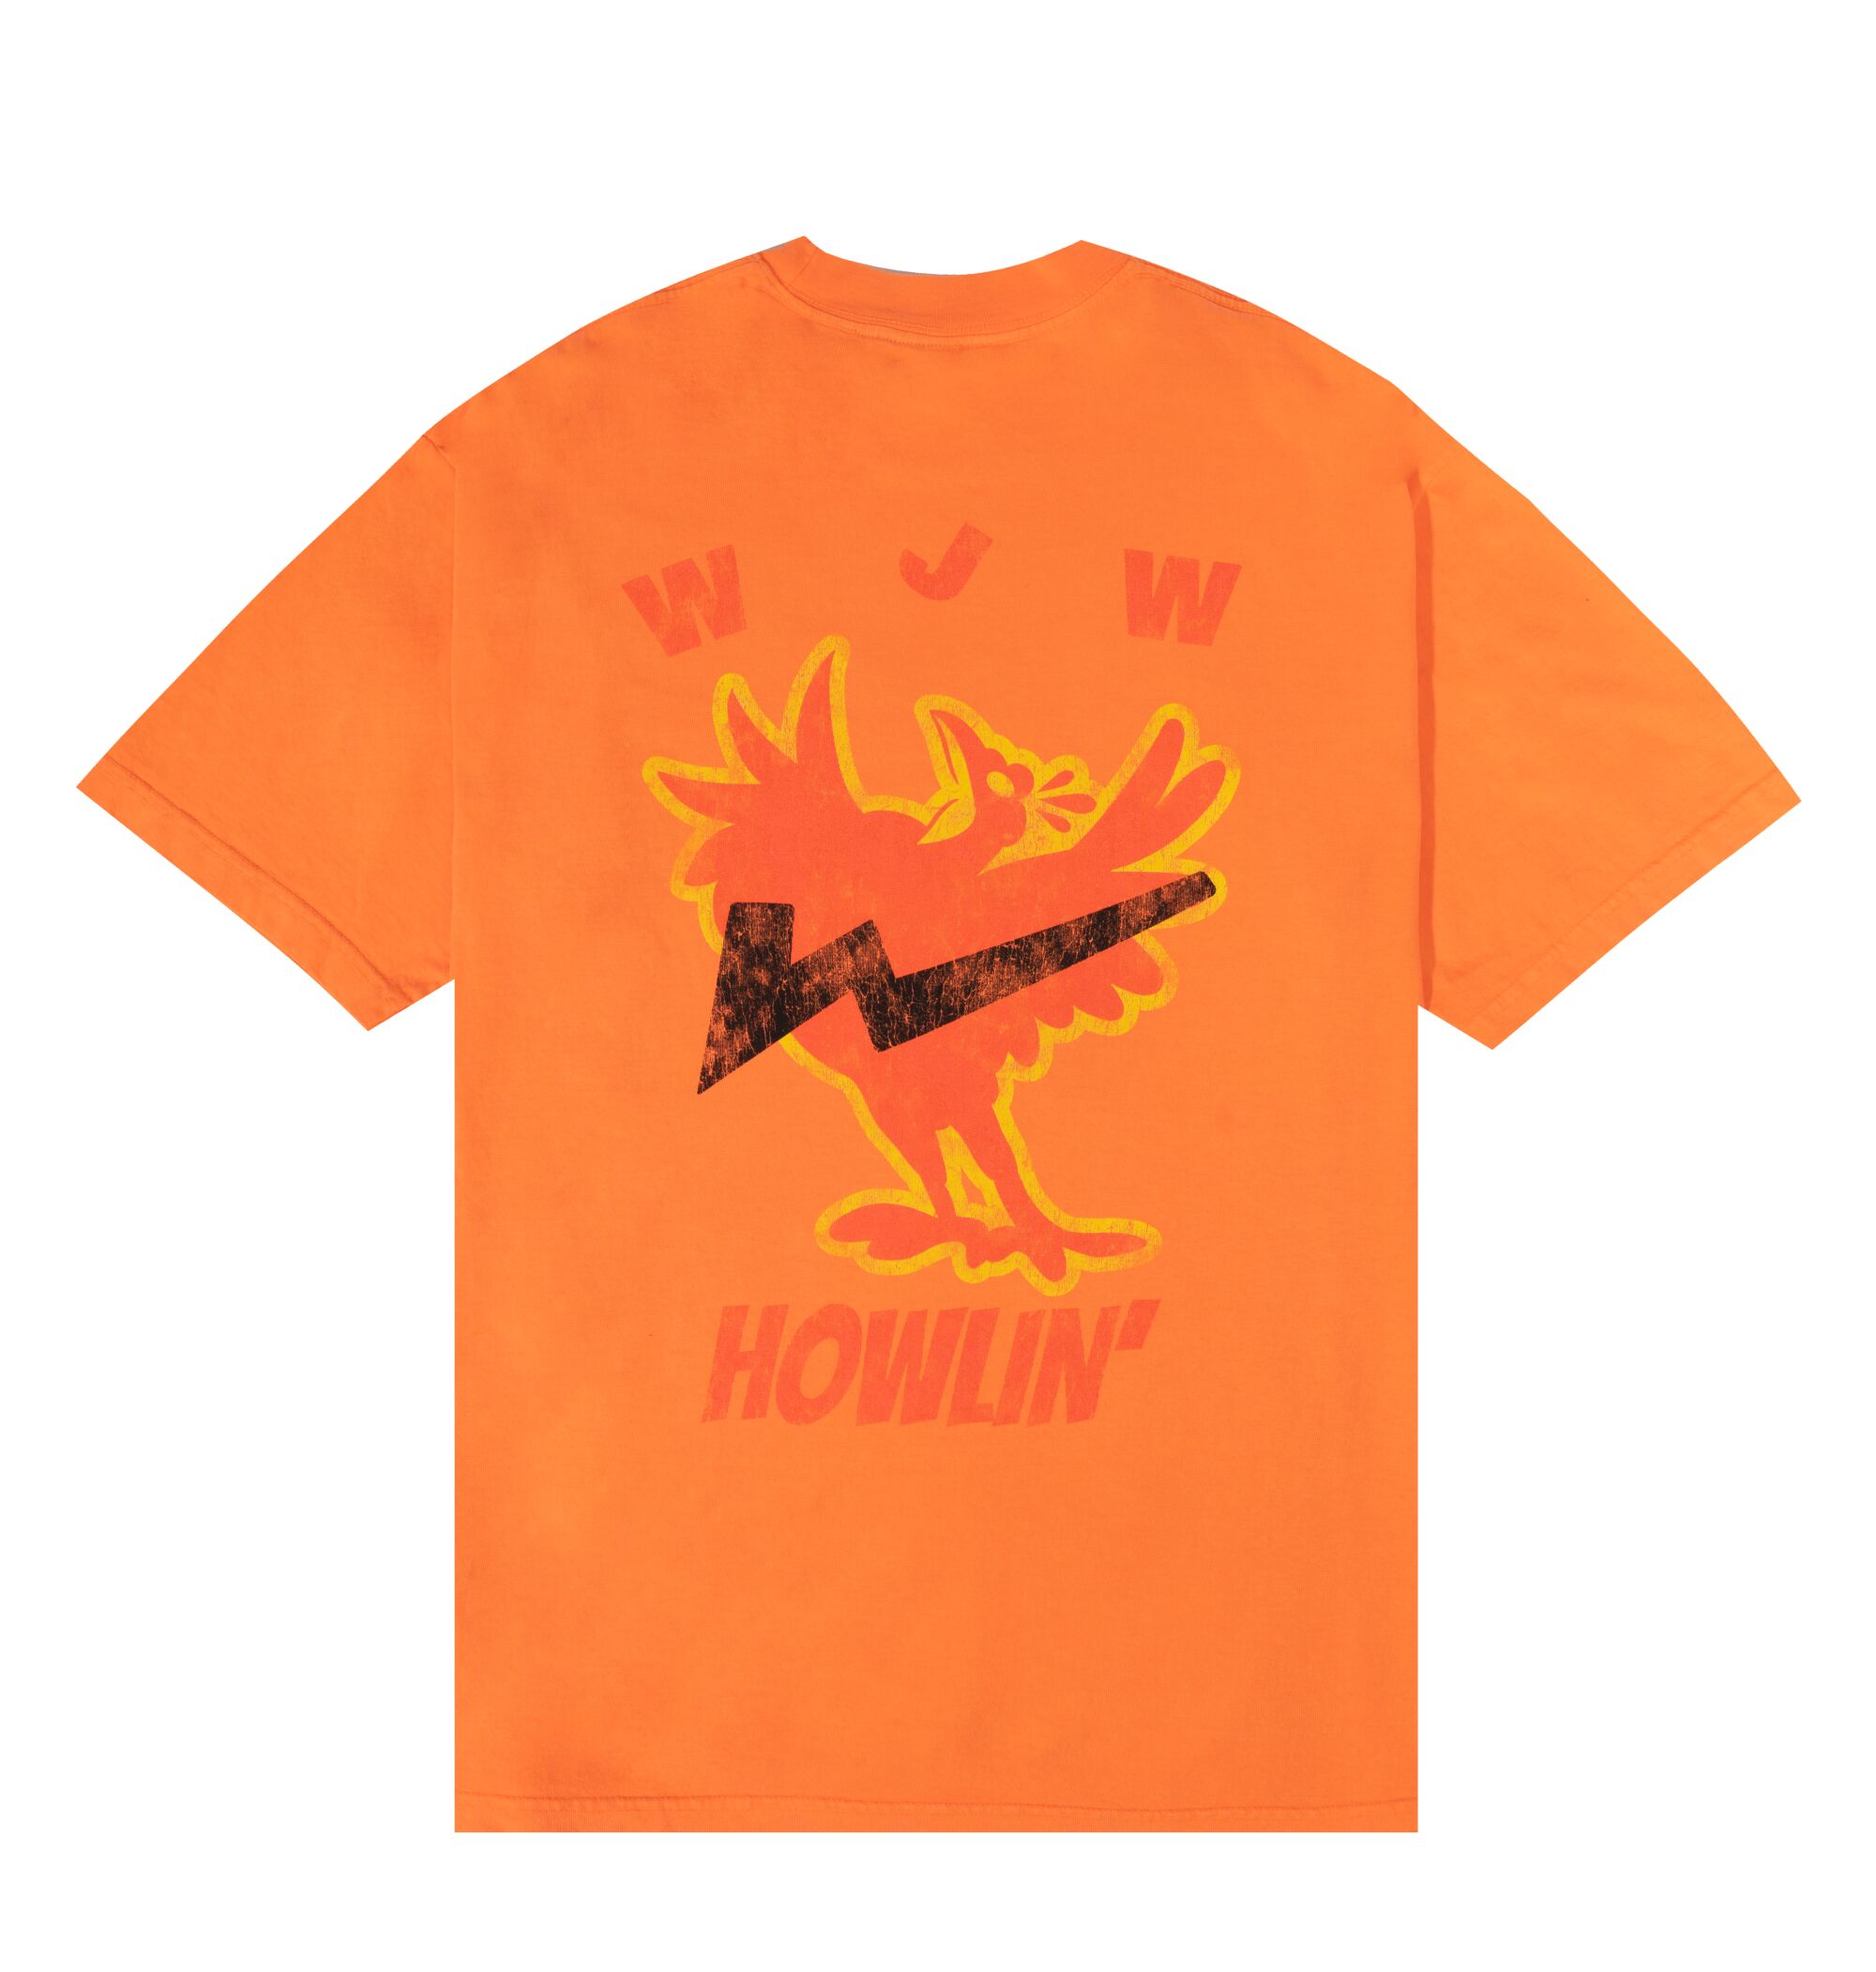 The iconic chicken logo appears on an orange T-shirt